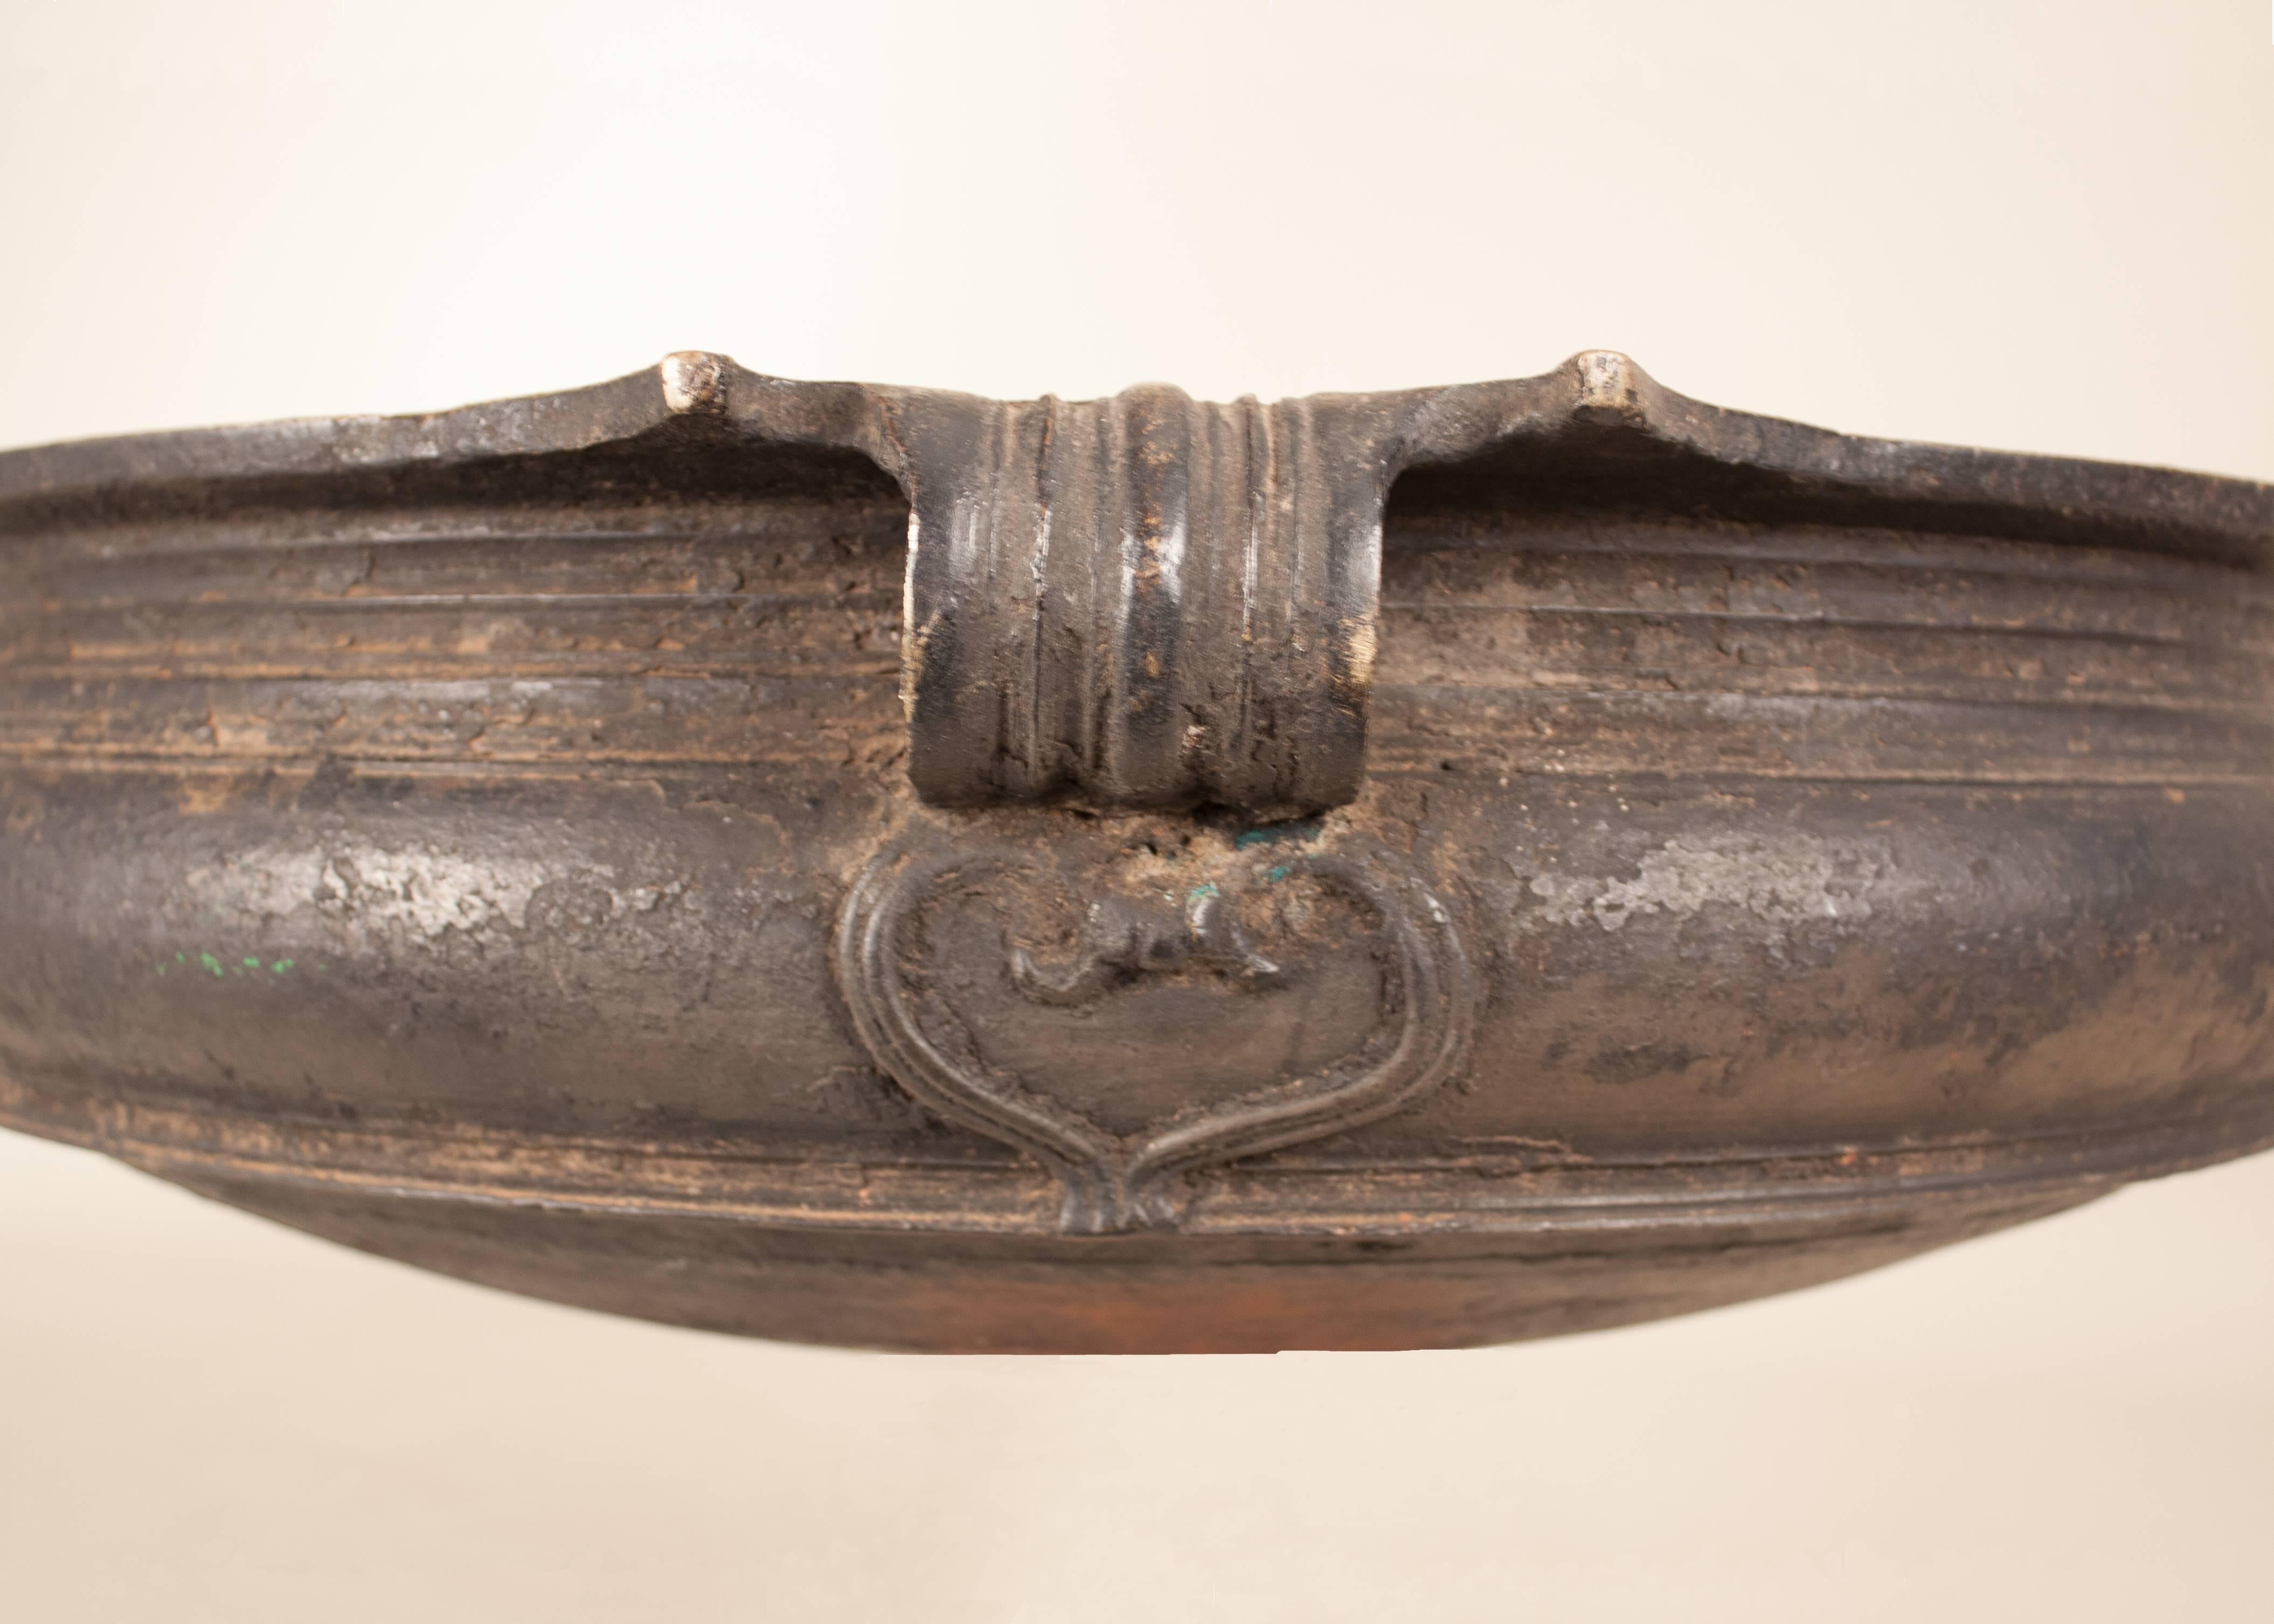 Anglo-Indian 19th Century Bronze Urli or Planter from South East Asia